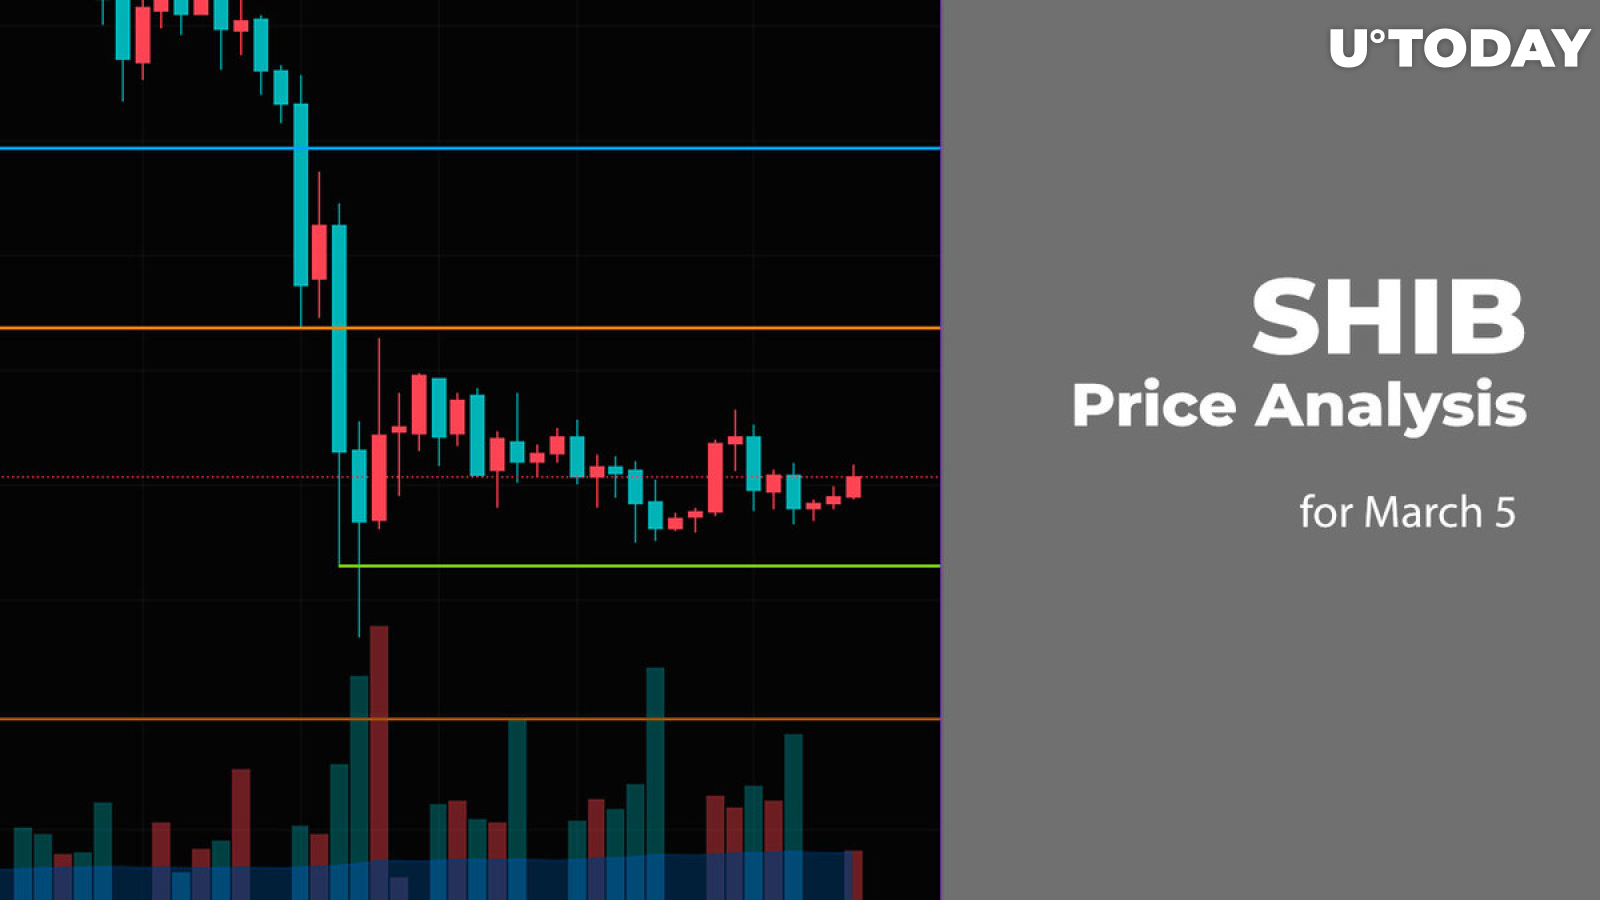 SHIB Price Analysis for March 5